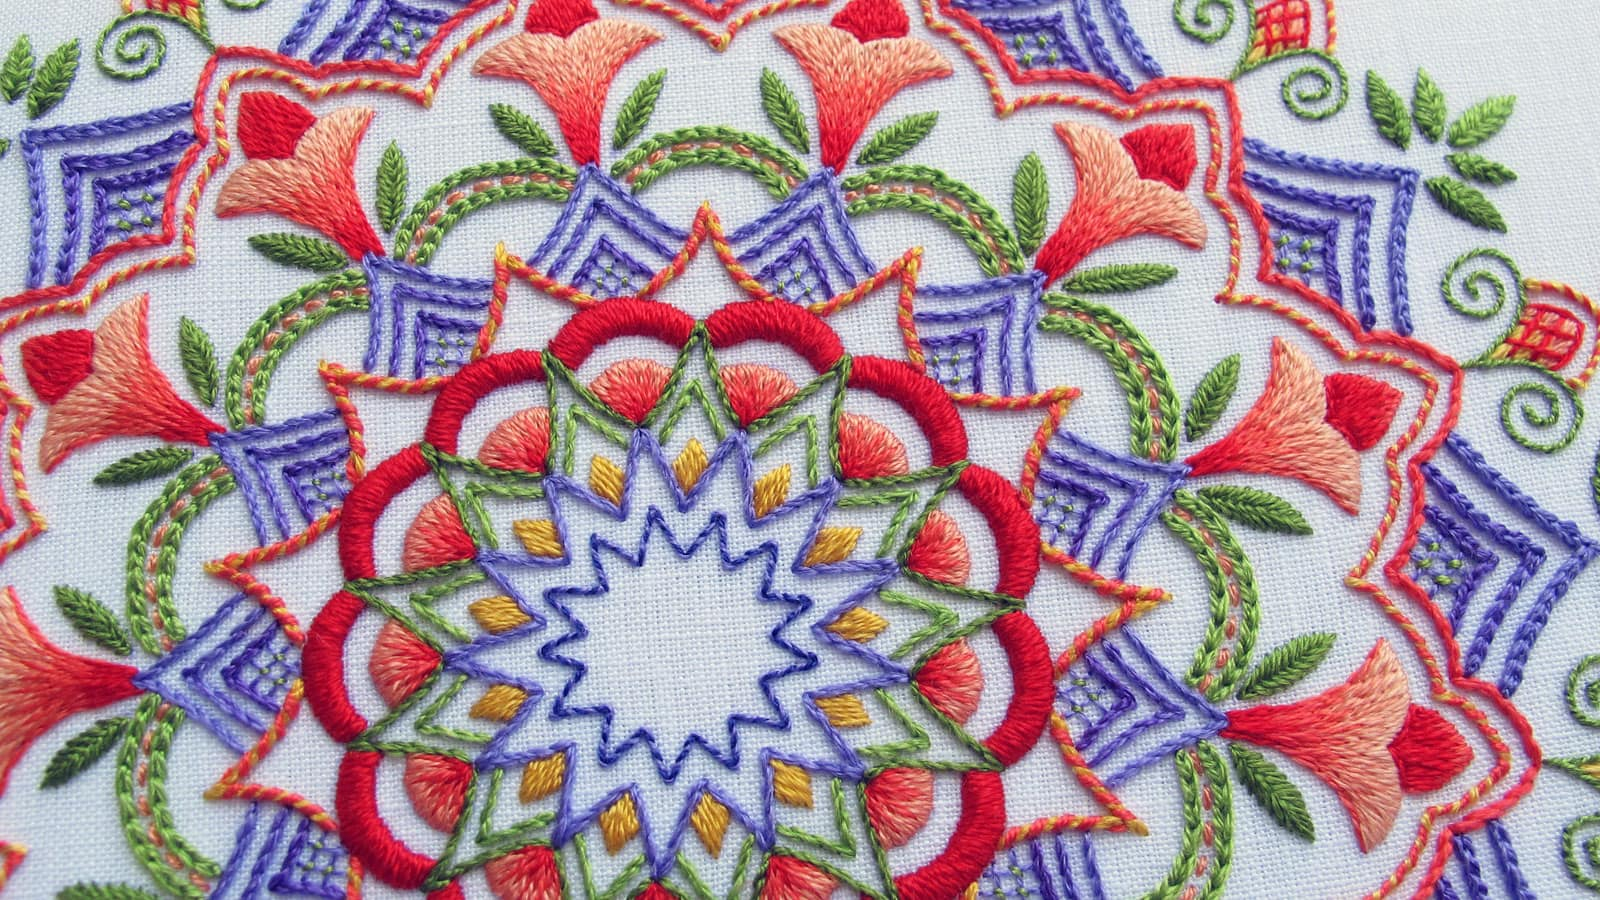 Gingham Embroidery Patterns Free Needlenthread Tips Tricks And Great Resources For Hand Embroidery